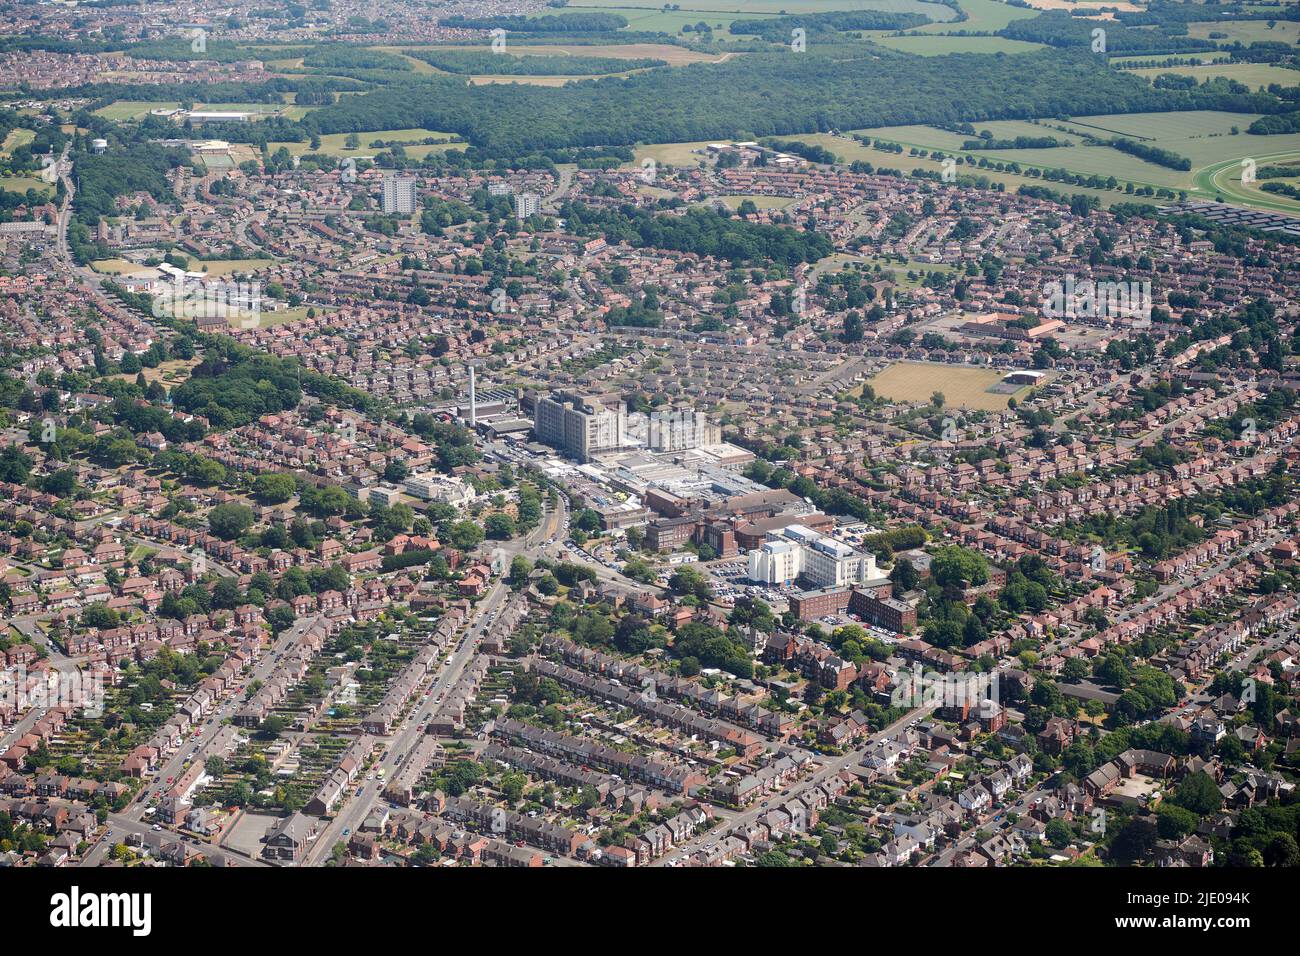 An aerial view of The Royal Infirmary, City of Doncaster, South Yorkshire, Northern England, UK Stock Photo